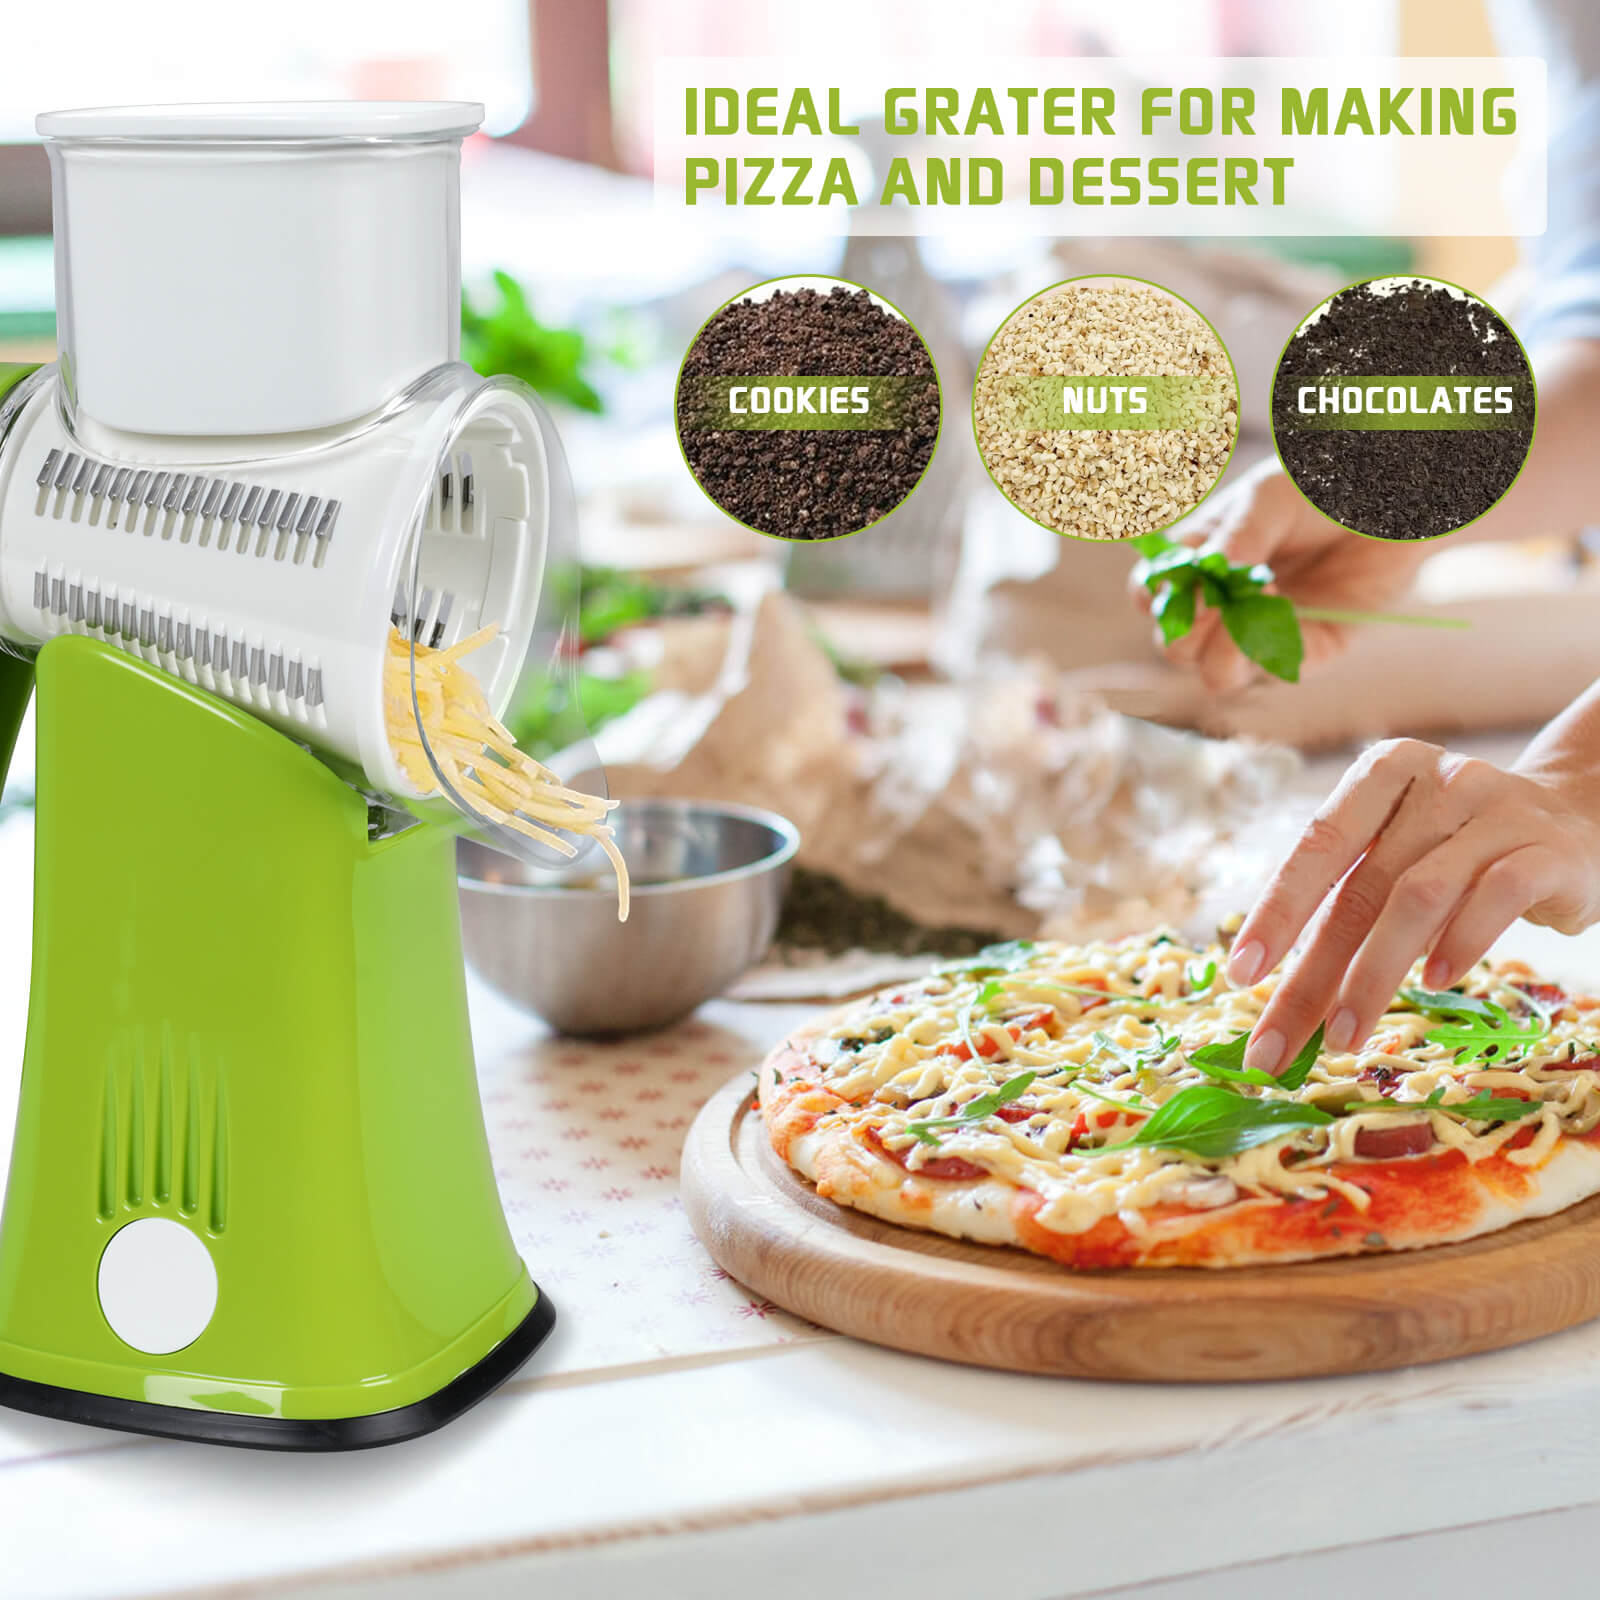 Handheld Rotary Cheese Grater Shredder with Stainless Steel Drum for  Grating Hard Cheese Chocolate and Nuts